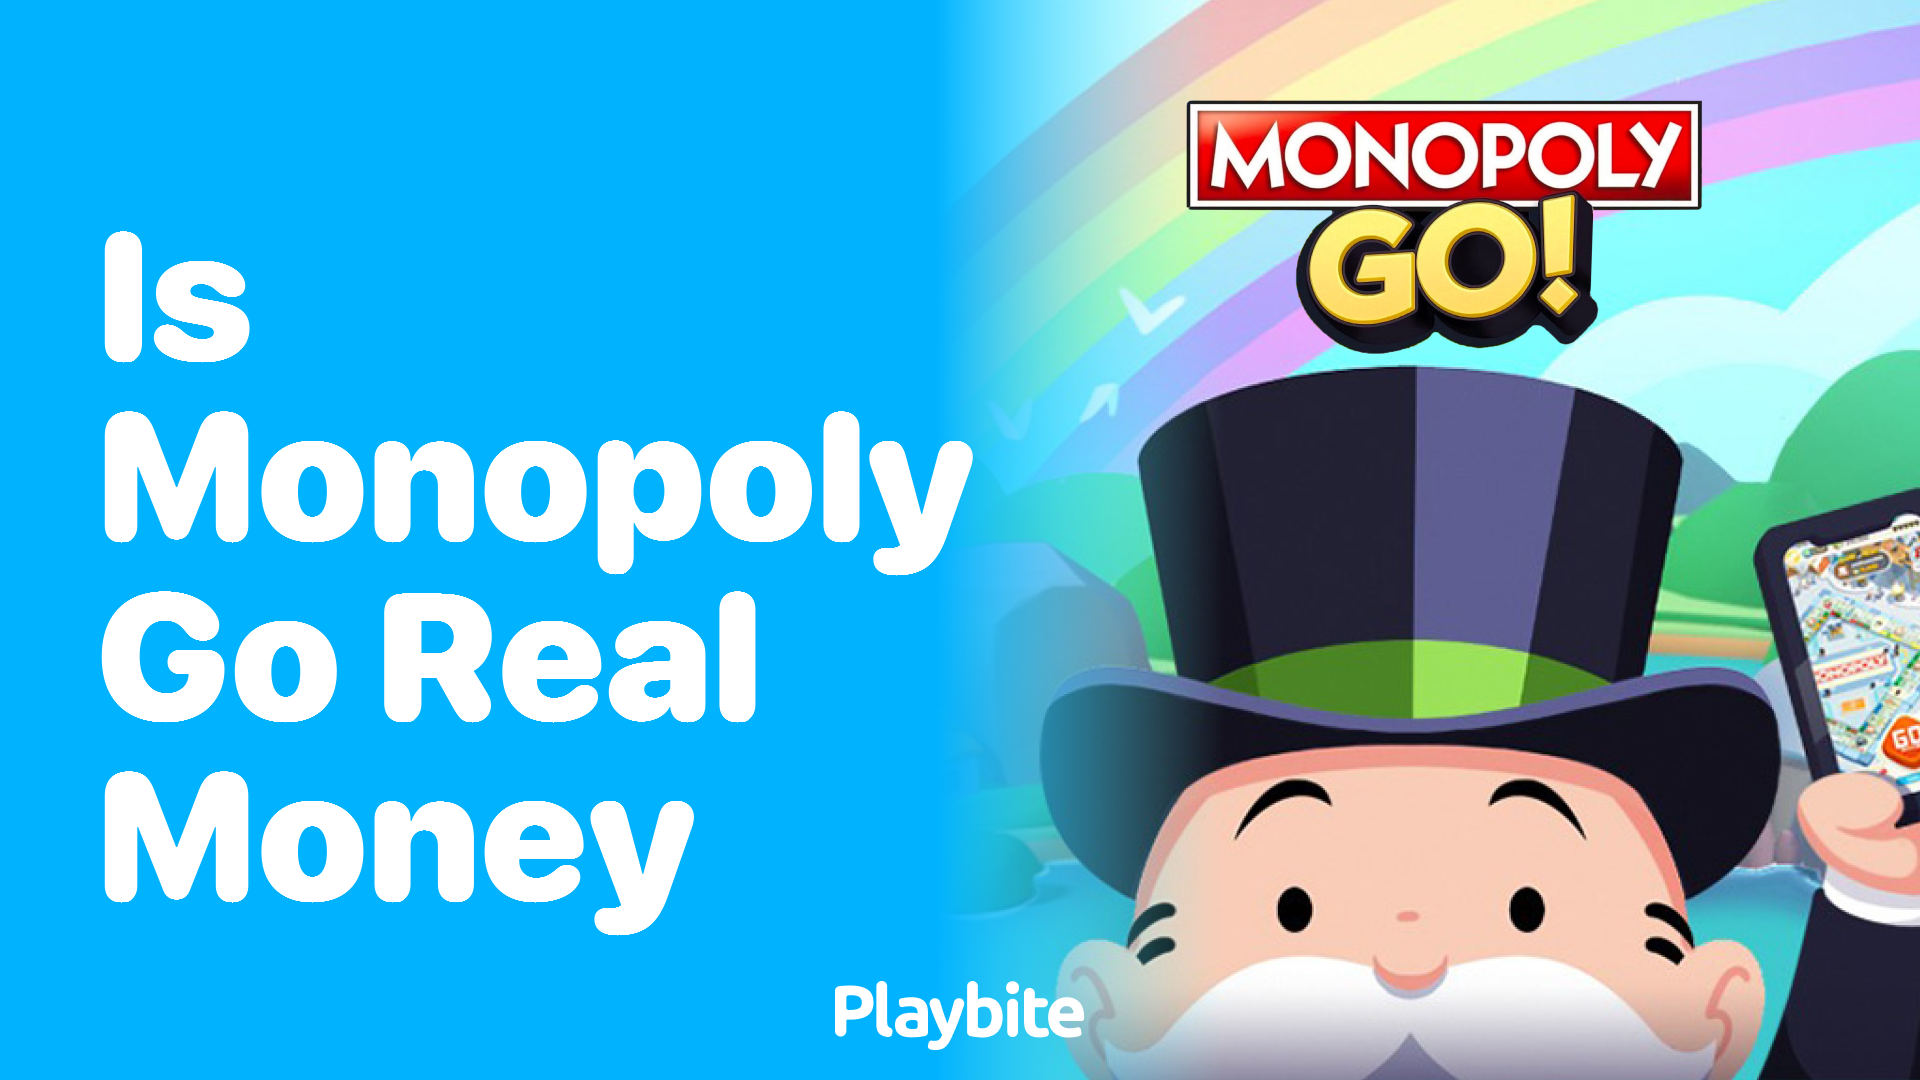 Is Monopoly Go Real Money? Unpacking the Monopoly Go Experience